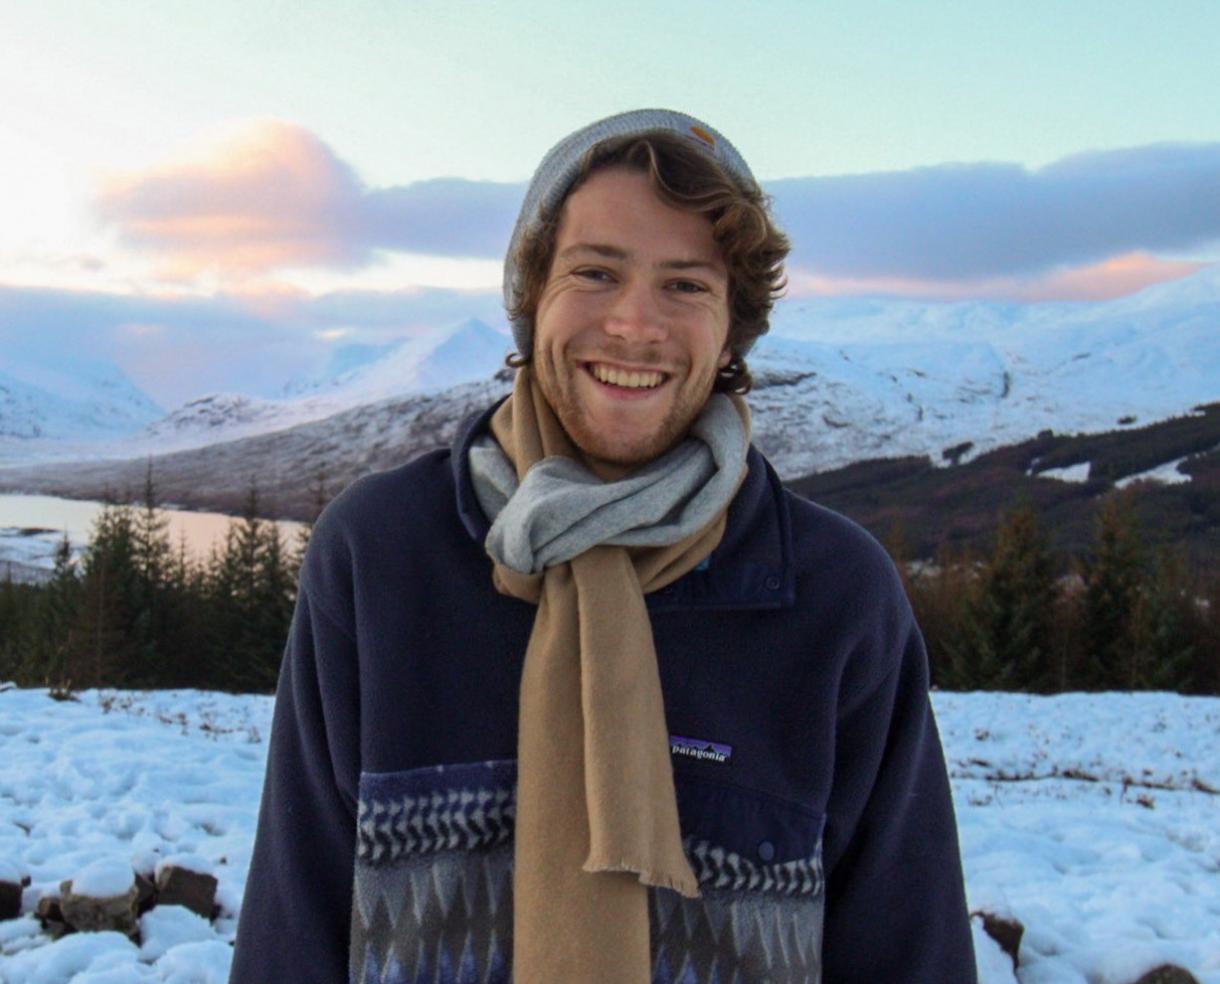 man smiling in front of a snowy mountain background